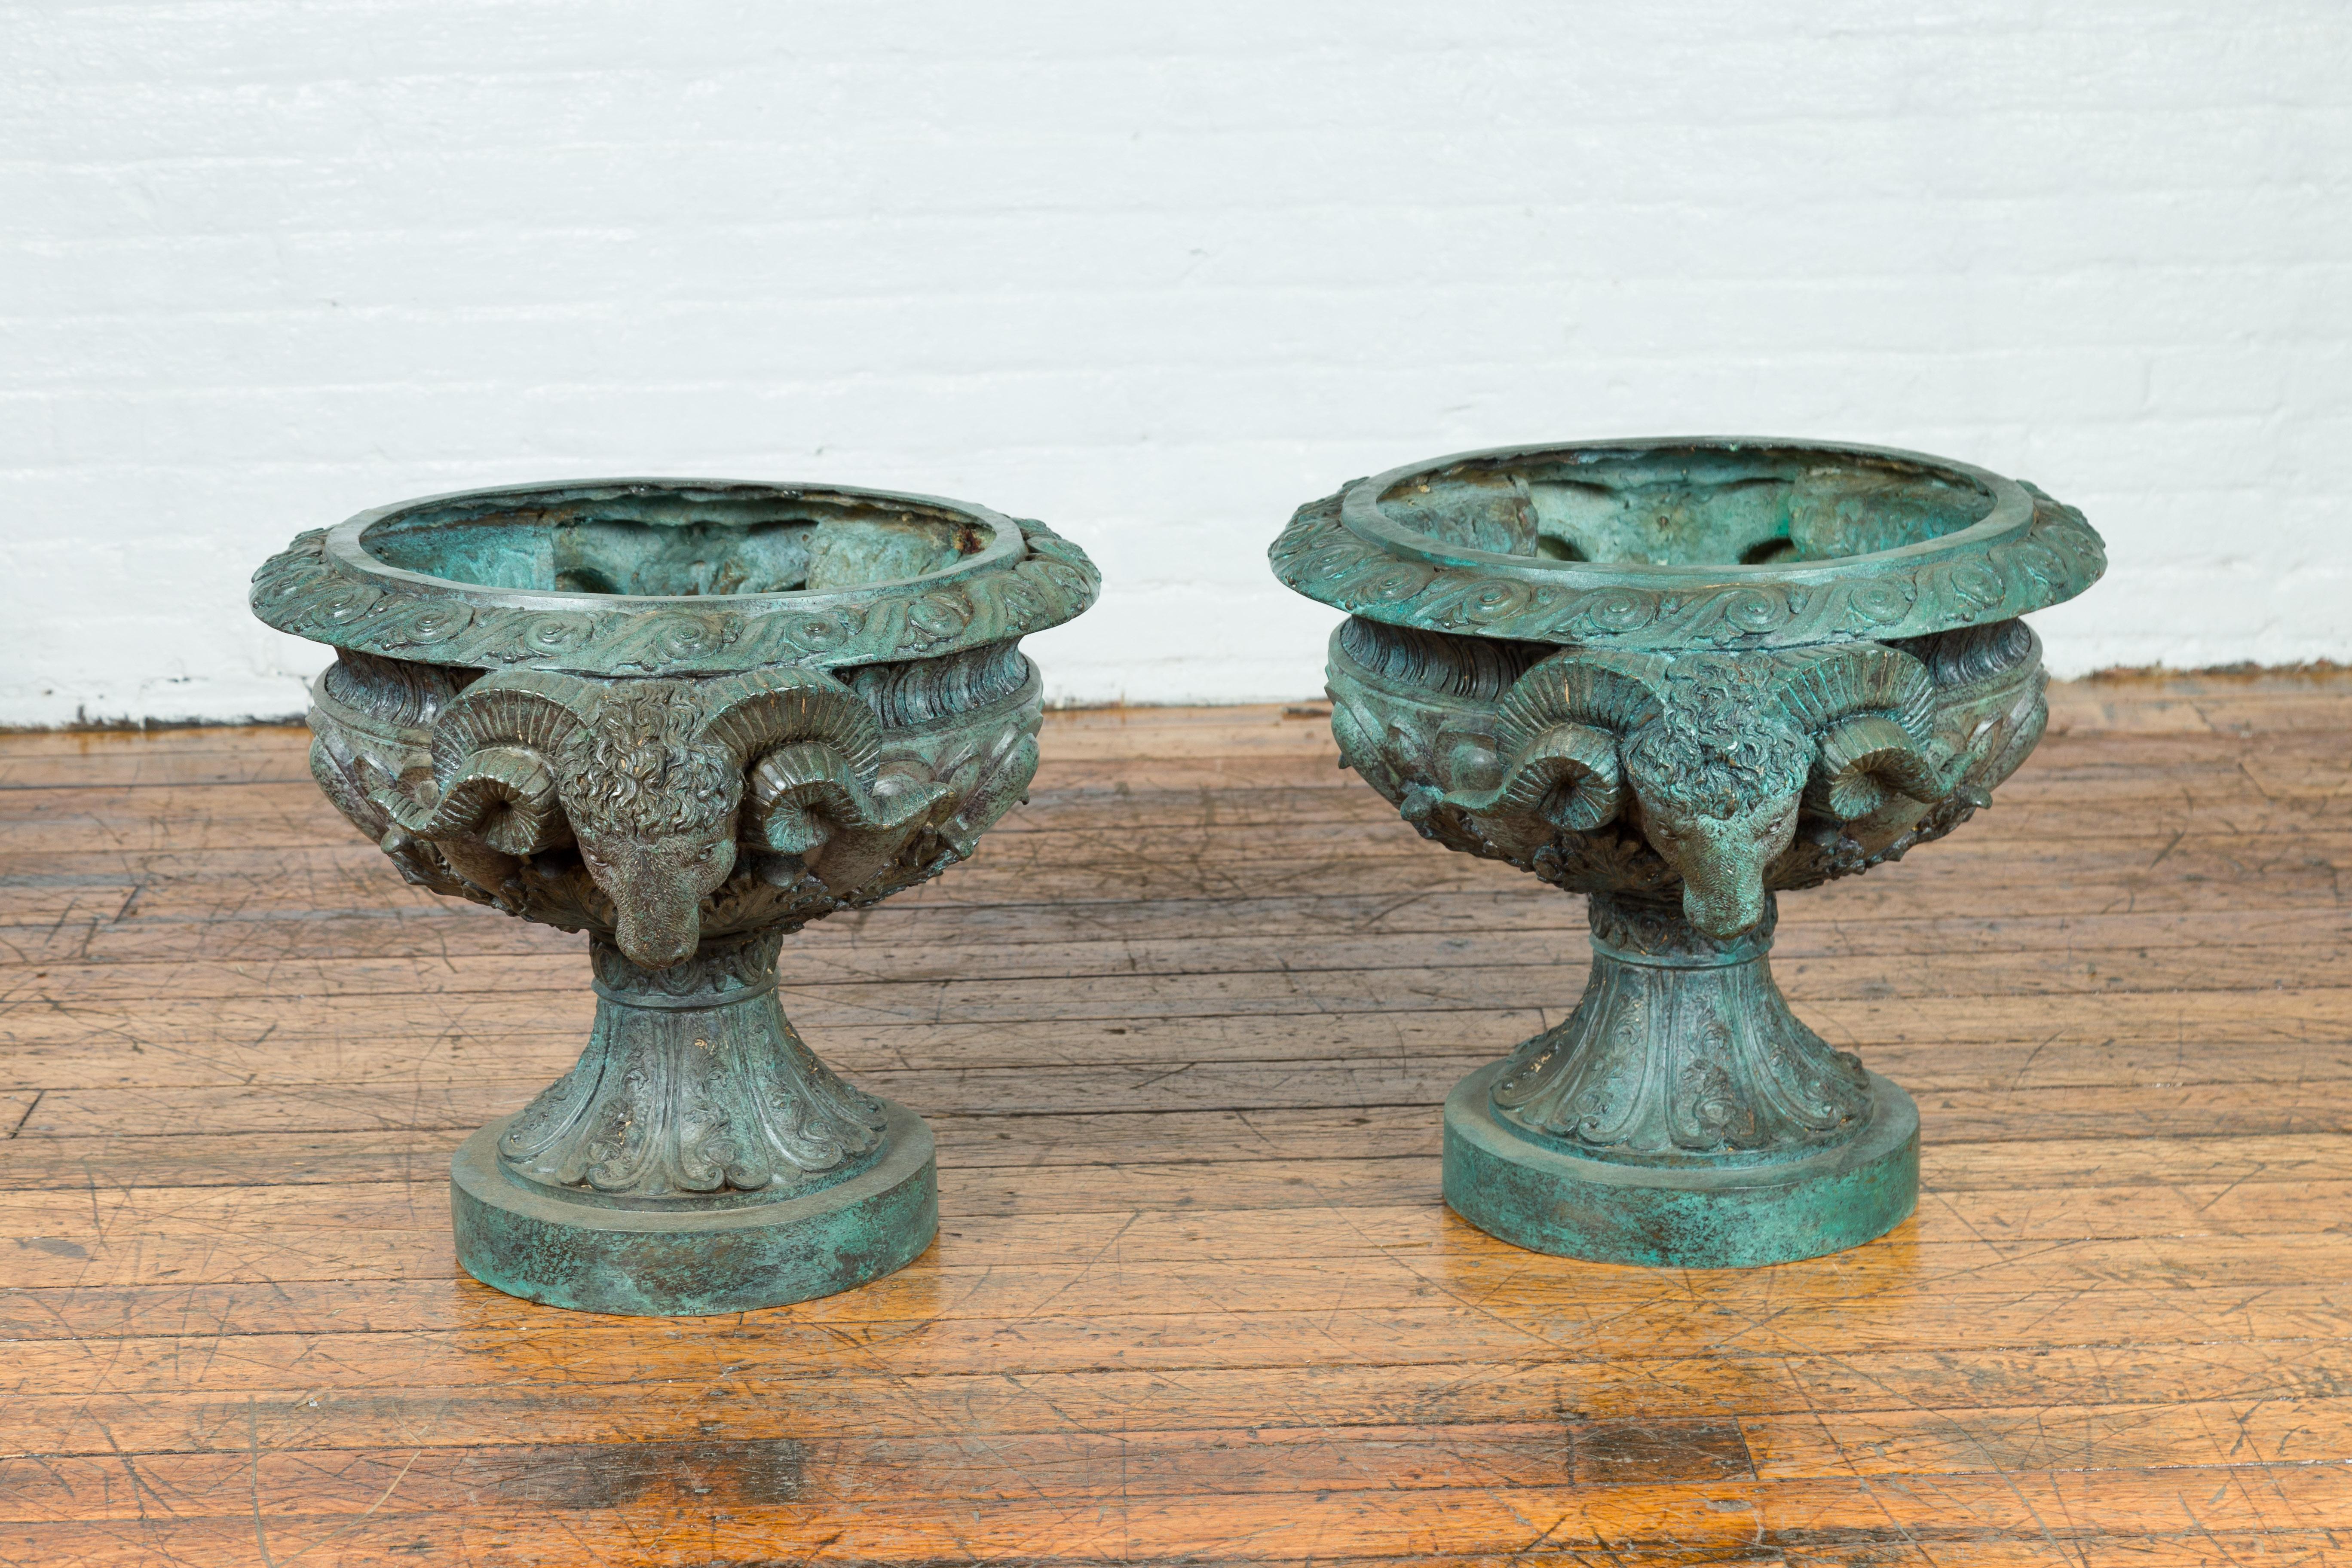 Greco Roman Style Vintage Verde Patina Bronze Urns with Rams' Heads, Sold Each 11